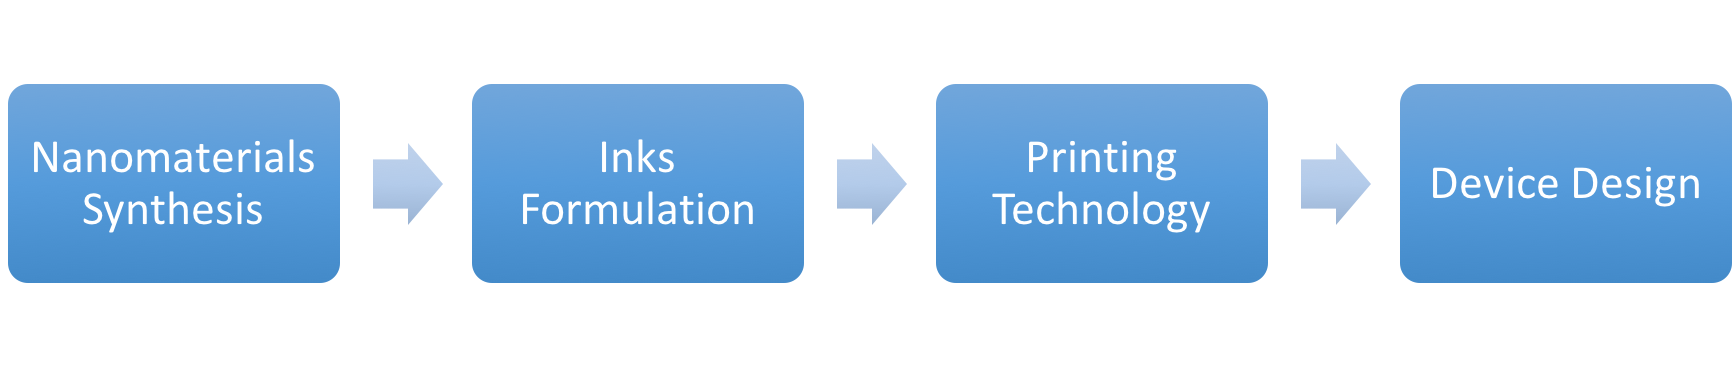 Vertical Integration Process: (1) semiconductor nanomaterial synthesis (2) Inks (3) Printing (4) Device Design